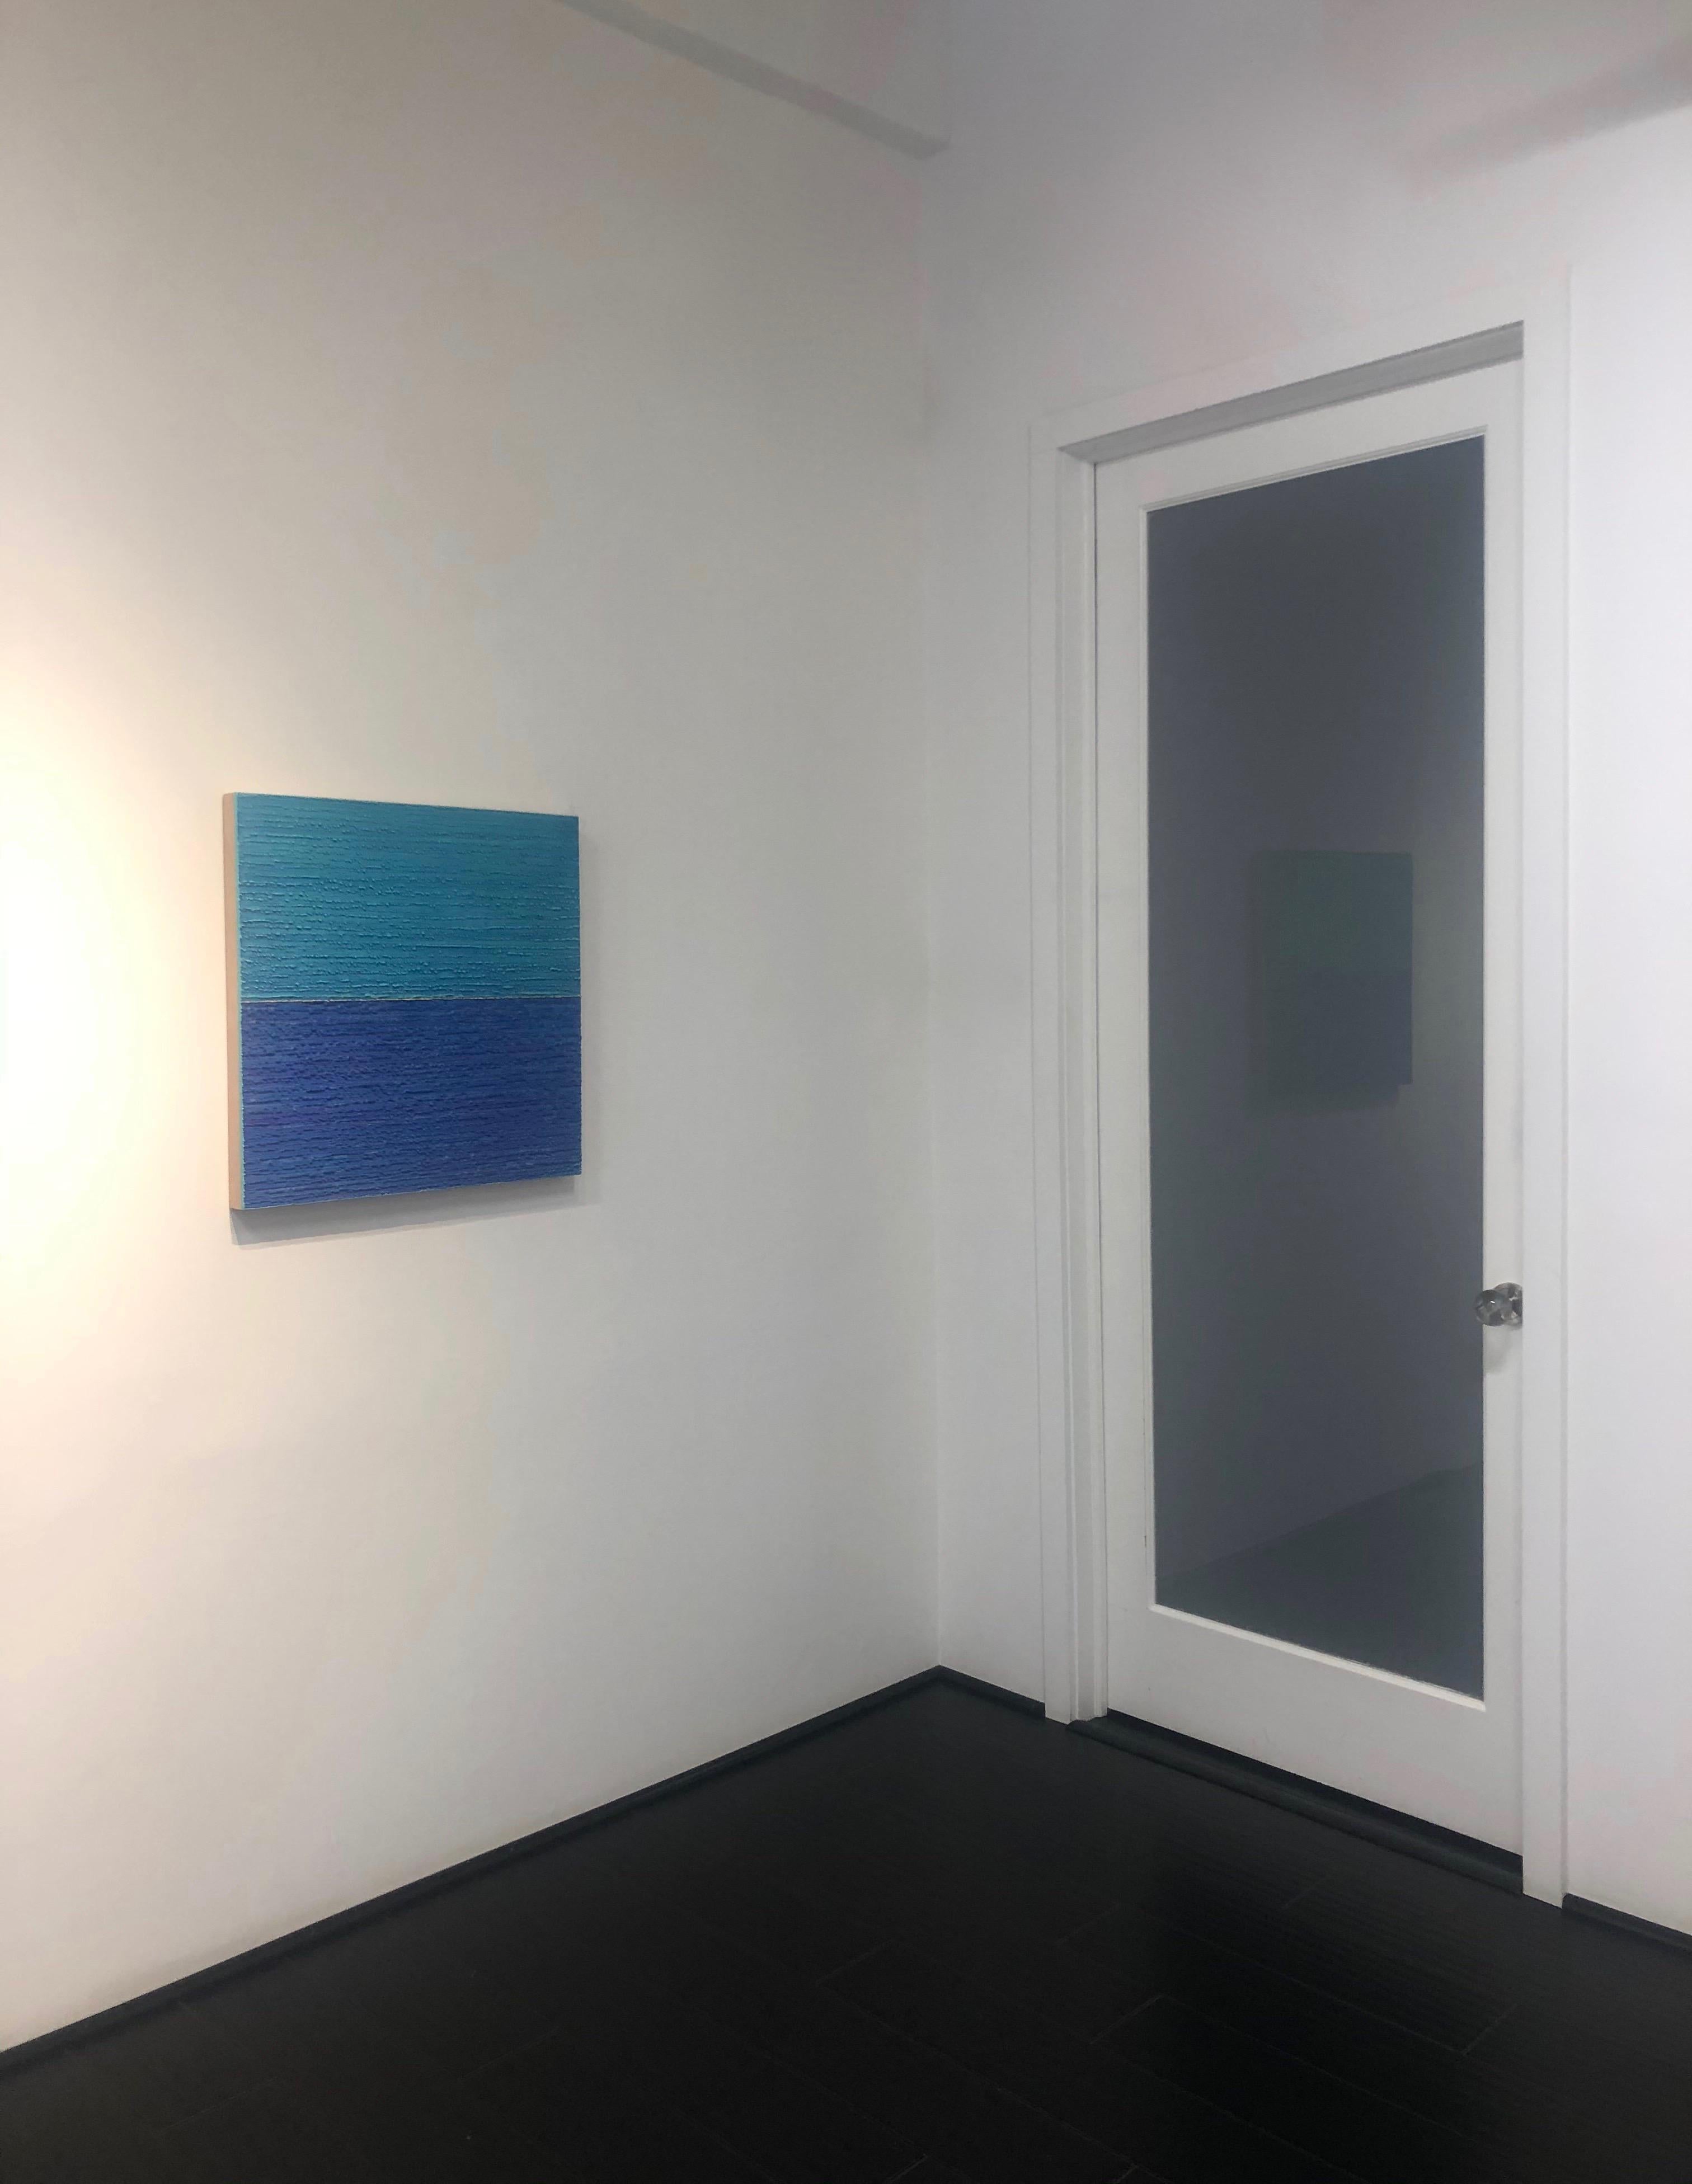 Silk Road 442, Cobalt Blue, Bright Electric Teal Square Color Field Encaustic - Contemporary Painting by Joanne Mattera